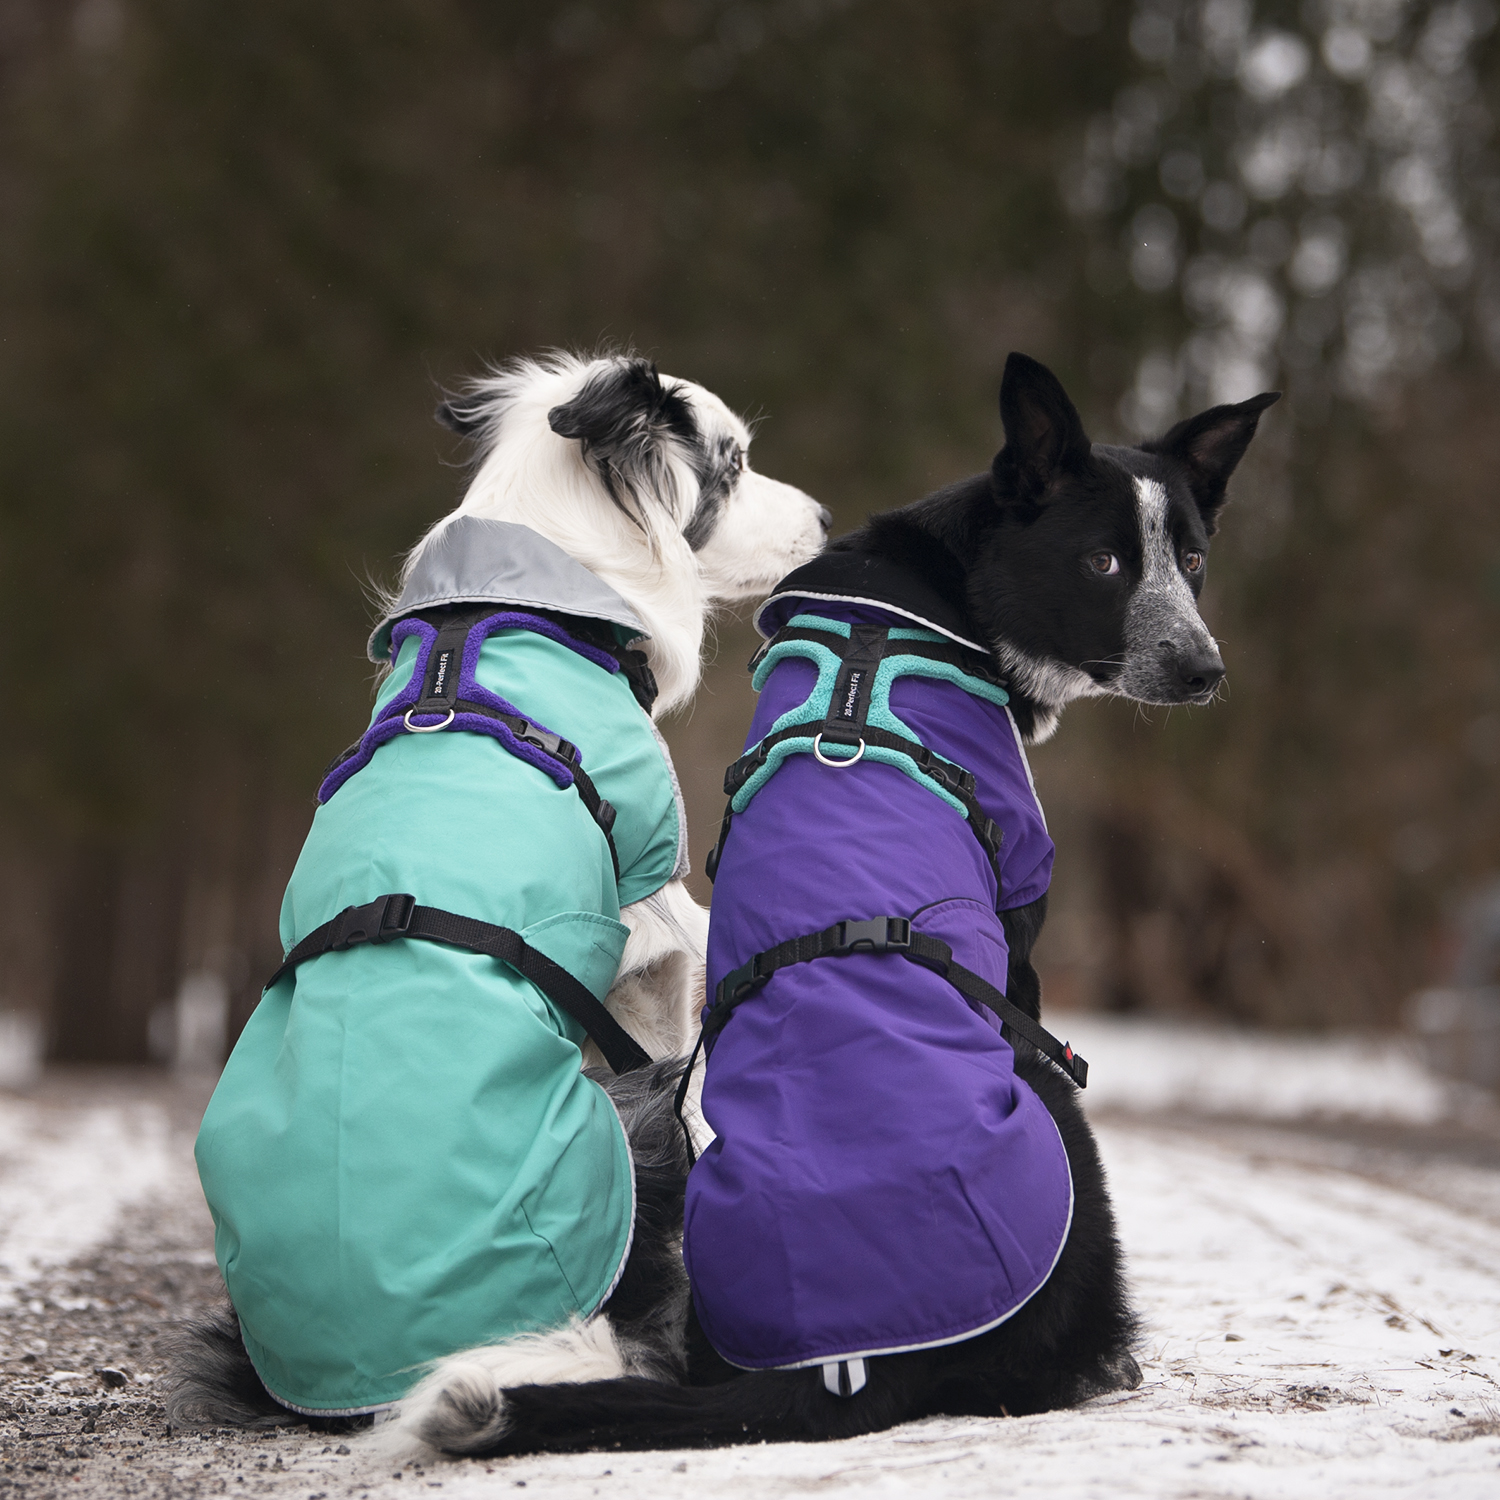 Can My Chilly Dogs Coat Be Worn With a Harness? - Chilly Dogs